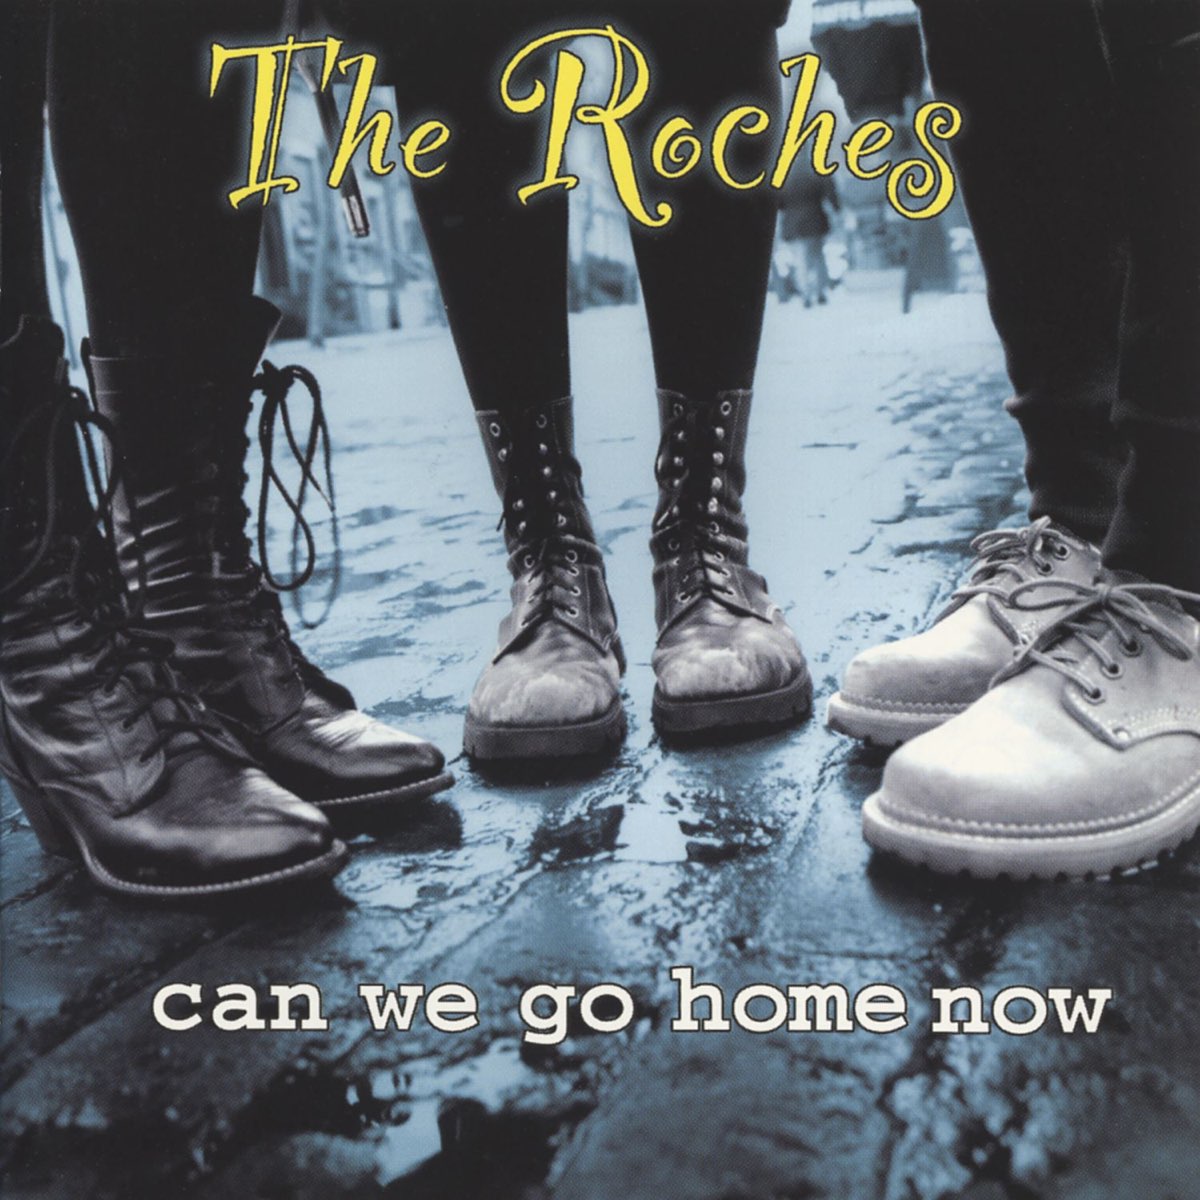 We coming home now. The Roches album.